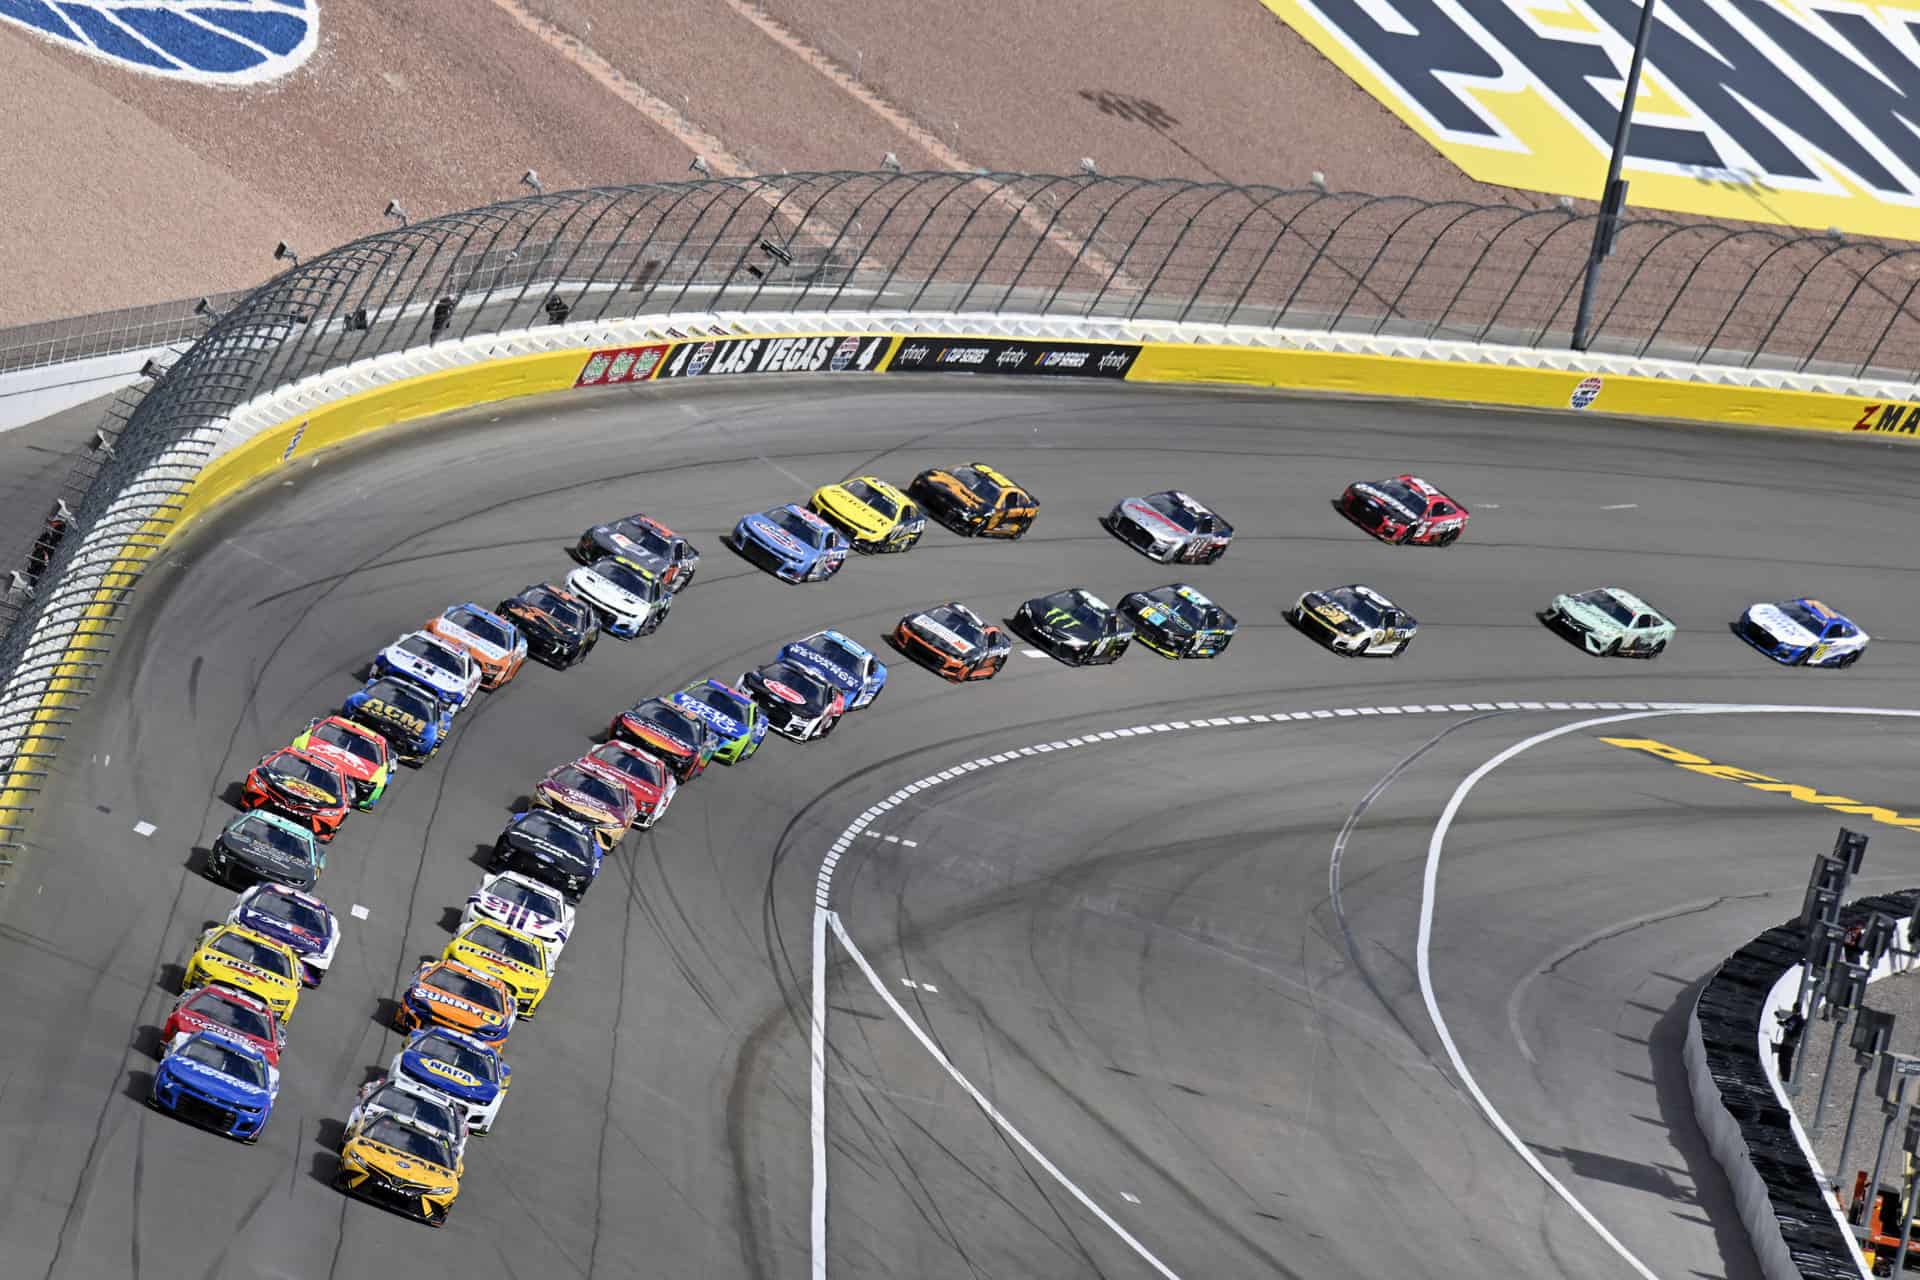 The NASCAR Cup Series line up for the green flag at Las Vegas Motor Speedway in 2022. Photo by Nigel Kinrade Photography.